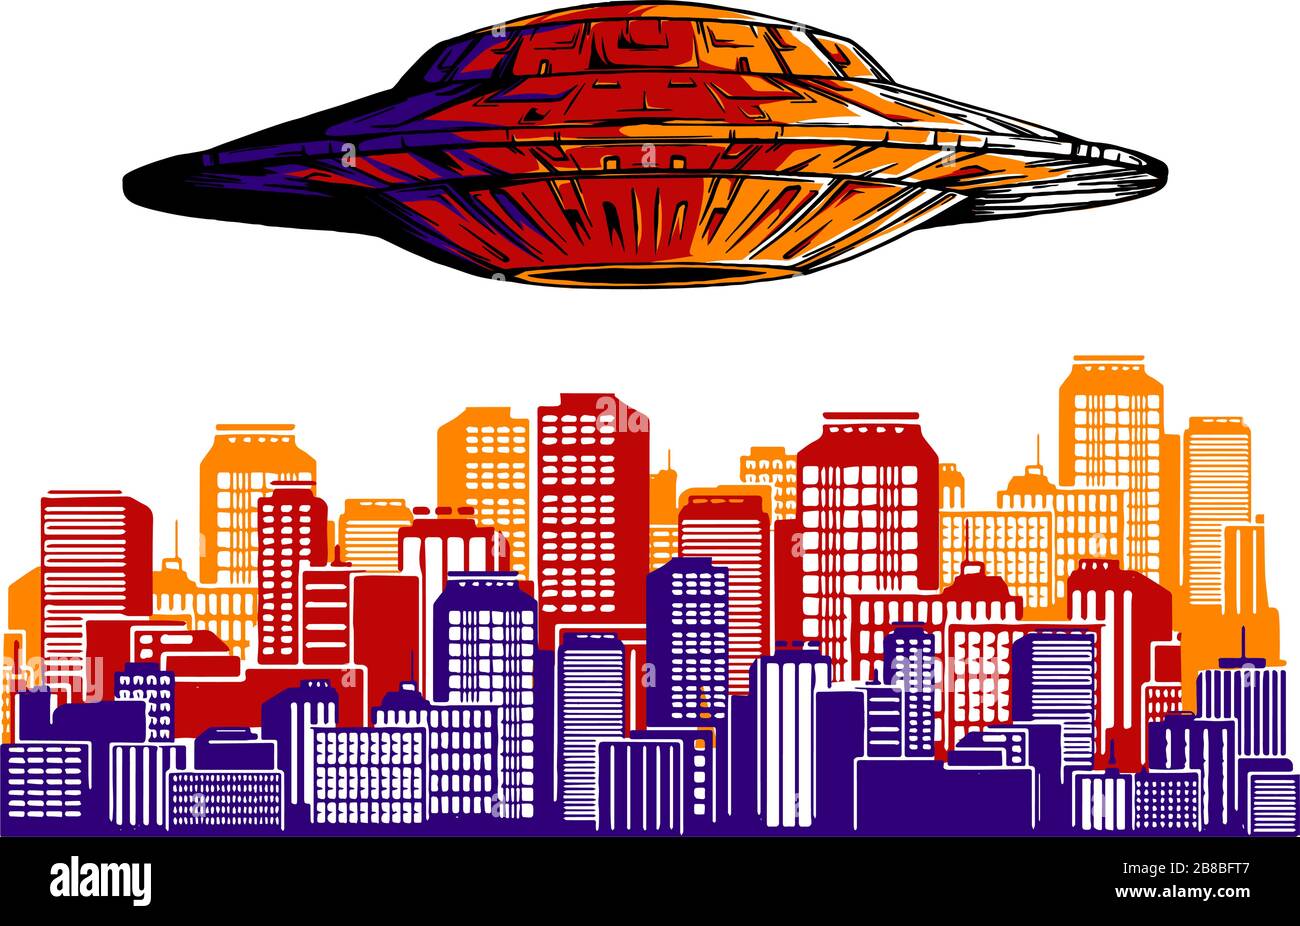 Alien Invasion. UFO destroys the city vector. Superhero protects the city. Silhouette of the city. Stock Vector